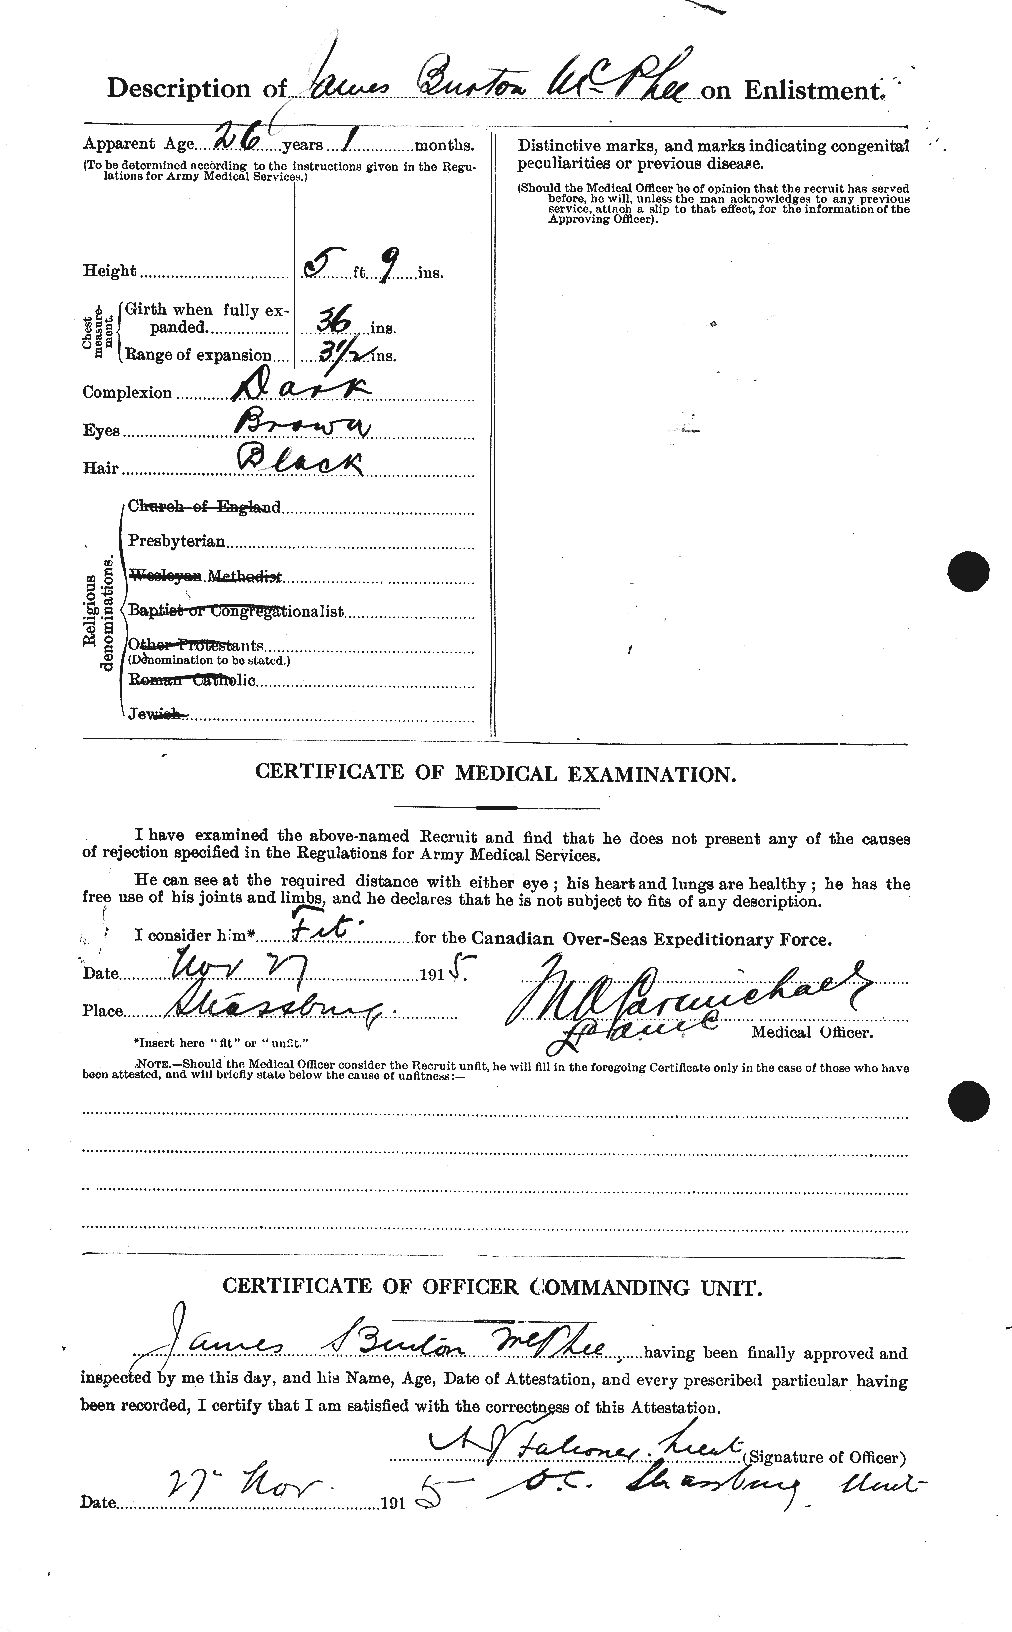 Personnel Records of the First World War - CEF 541082b